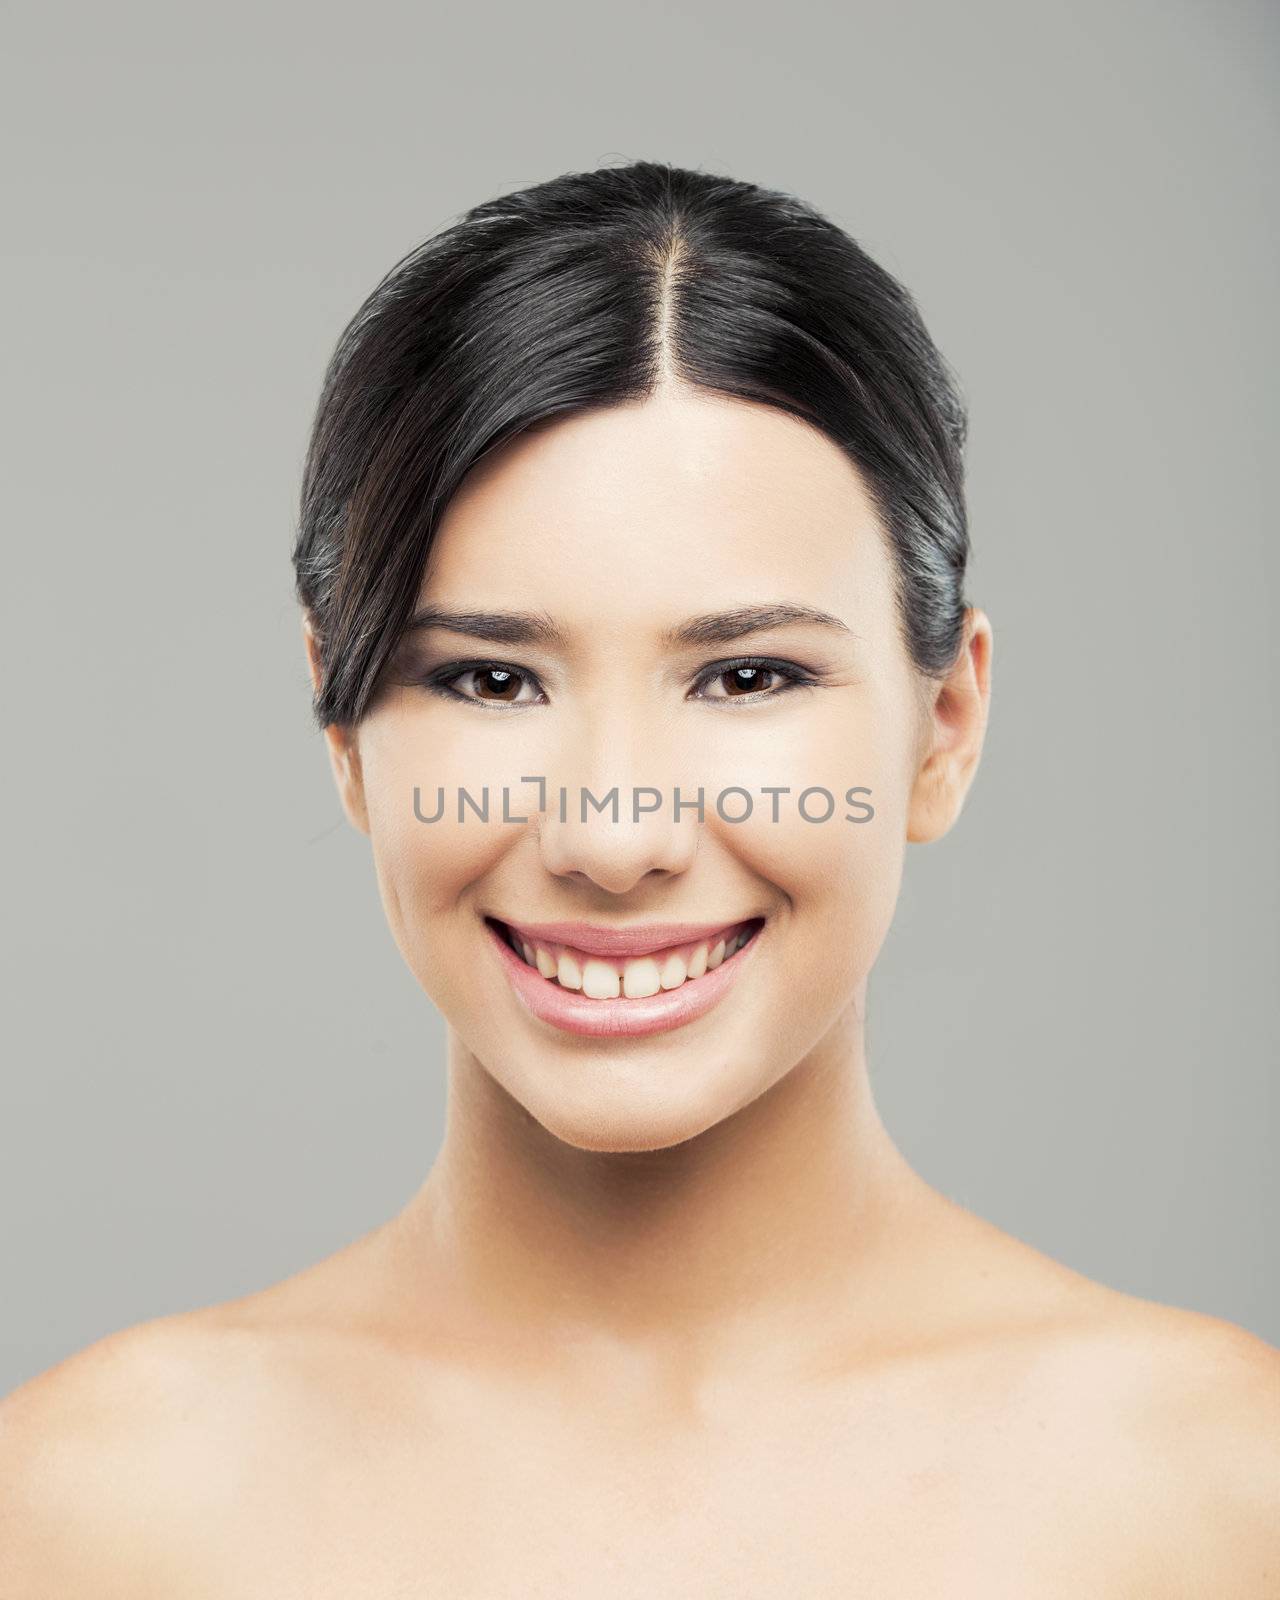 Beauty portrait of young asian woman smiling, over a gray background.